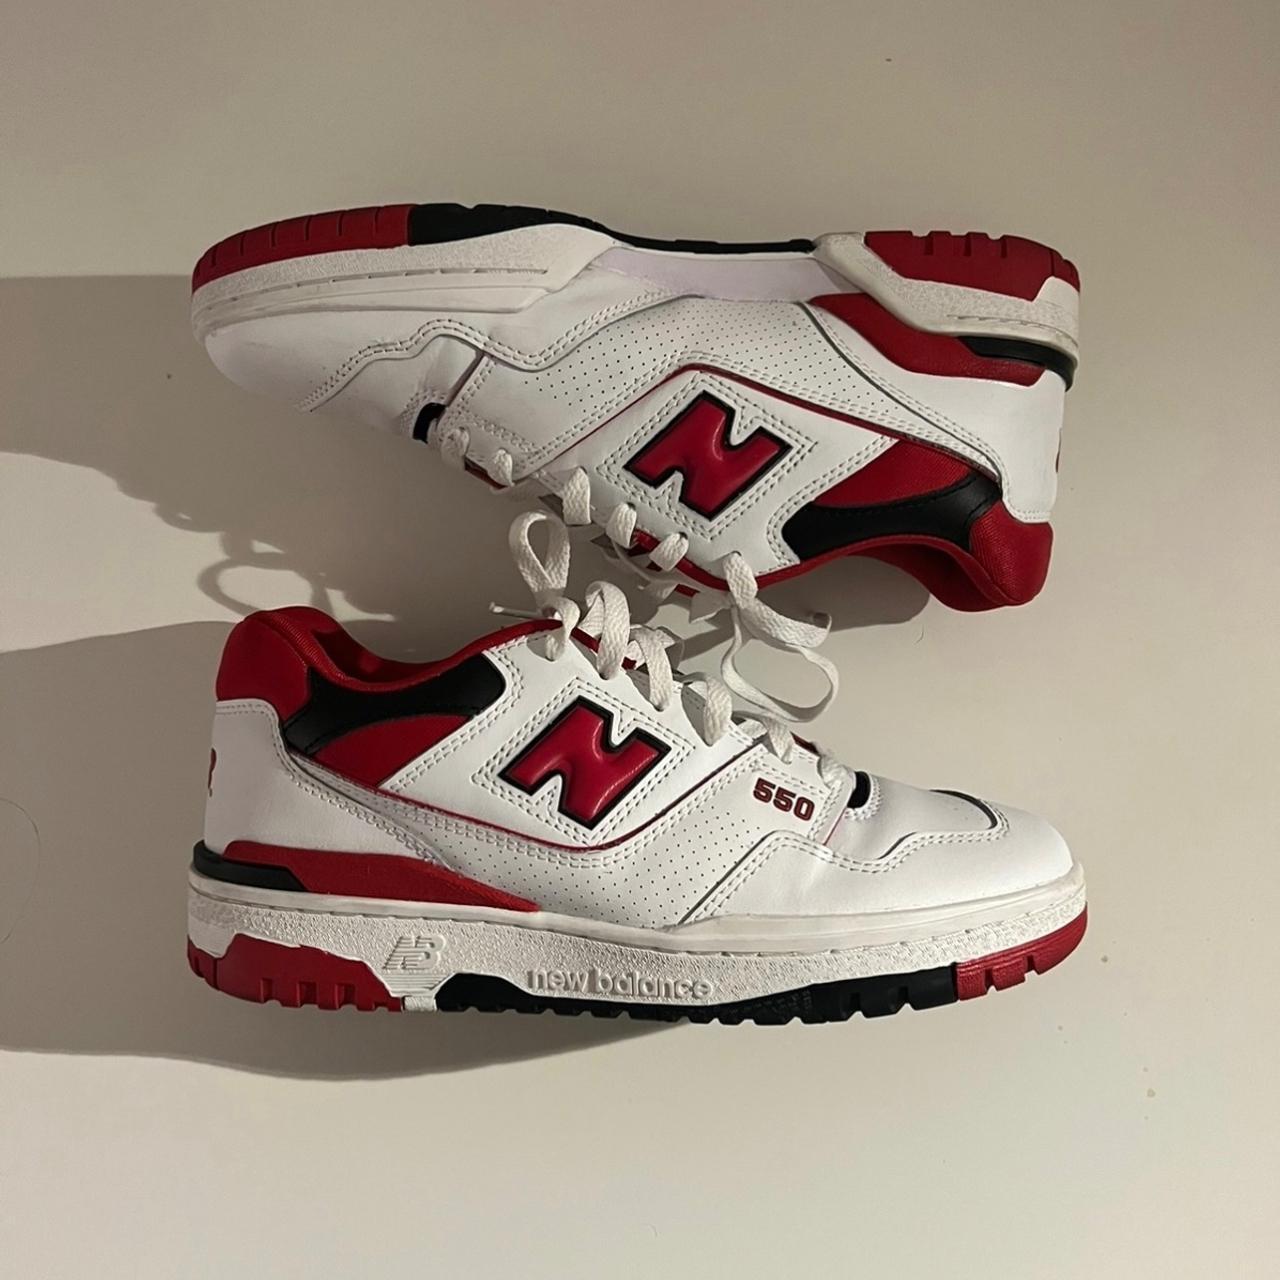 New Balance Men's White and Red Trainers | Depop